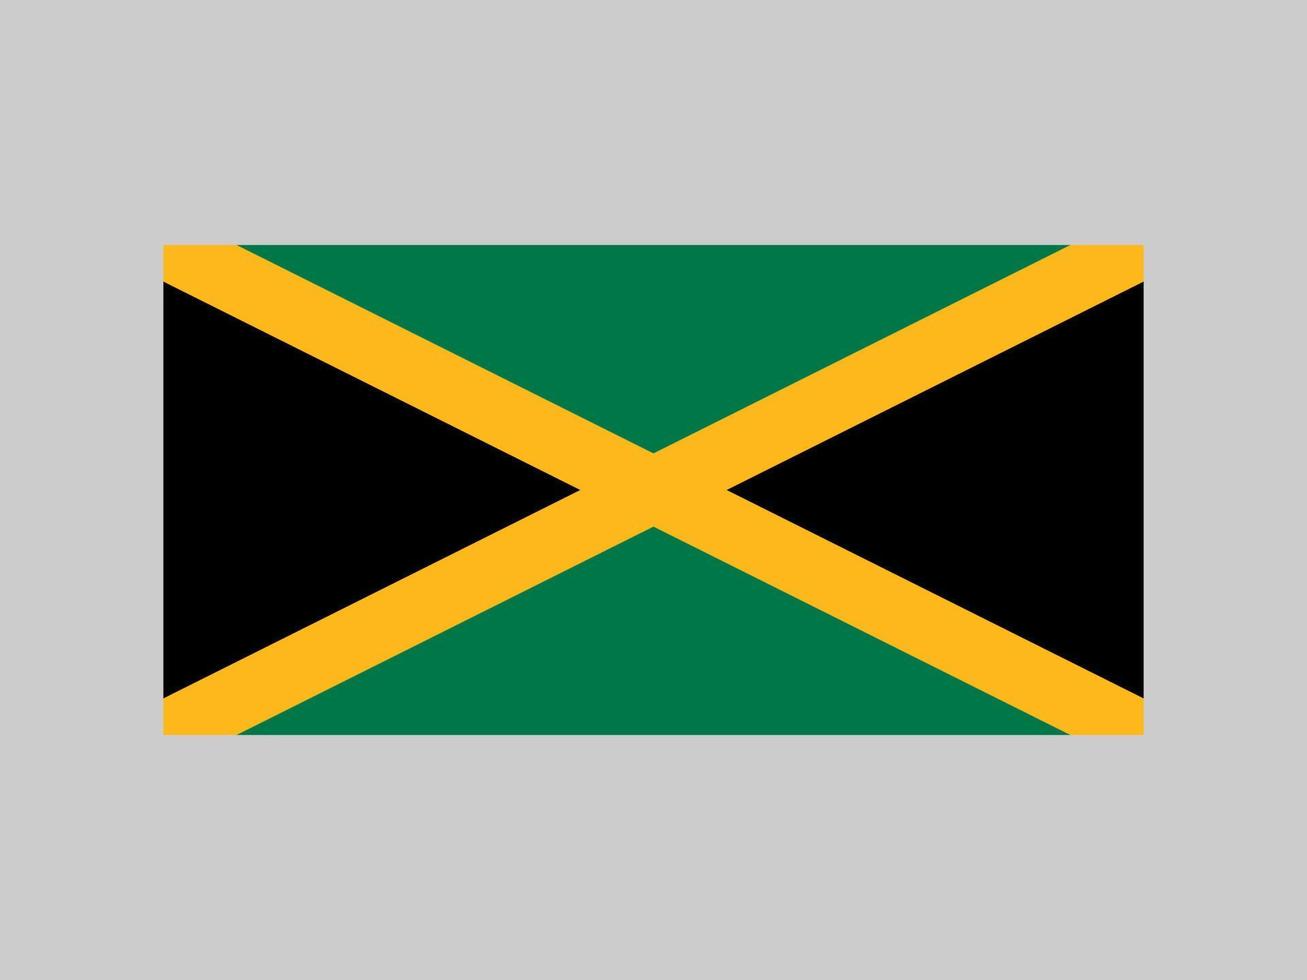 Jamaica flag, official colors and proportion. Vector illustration.